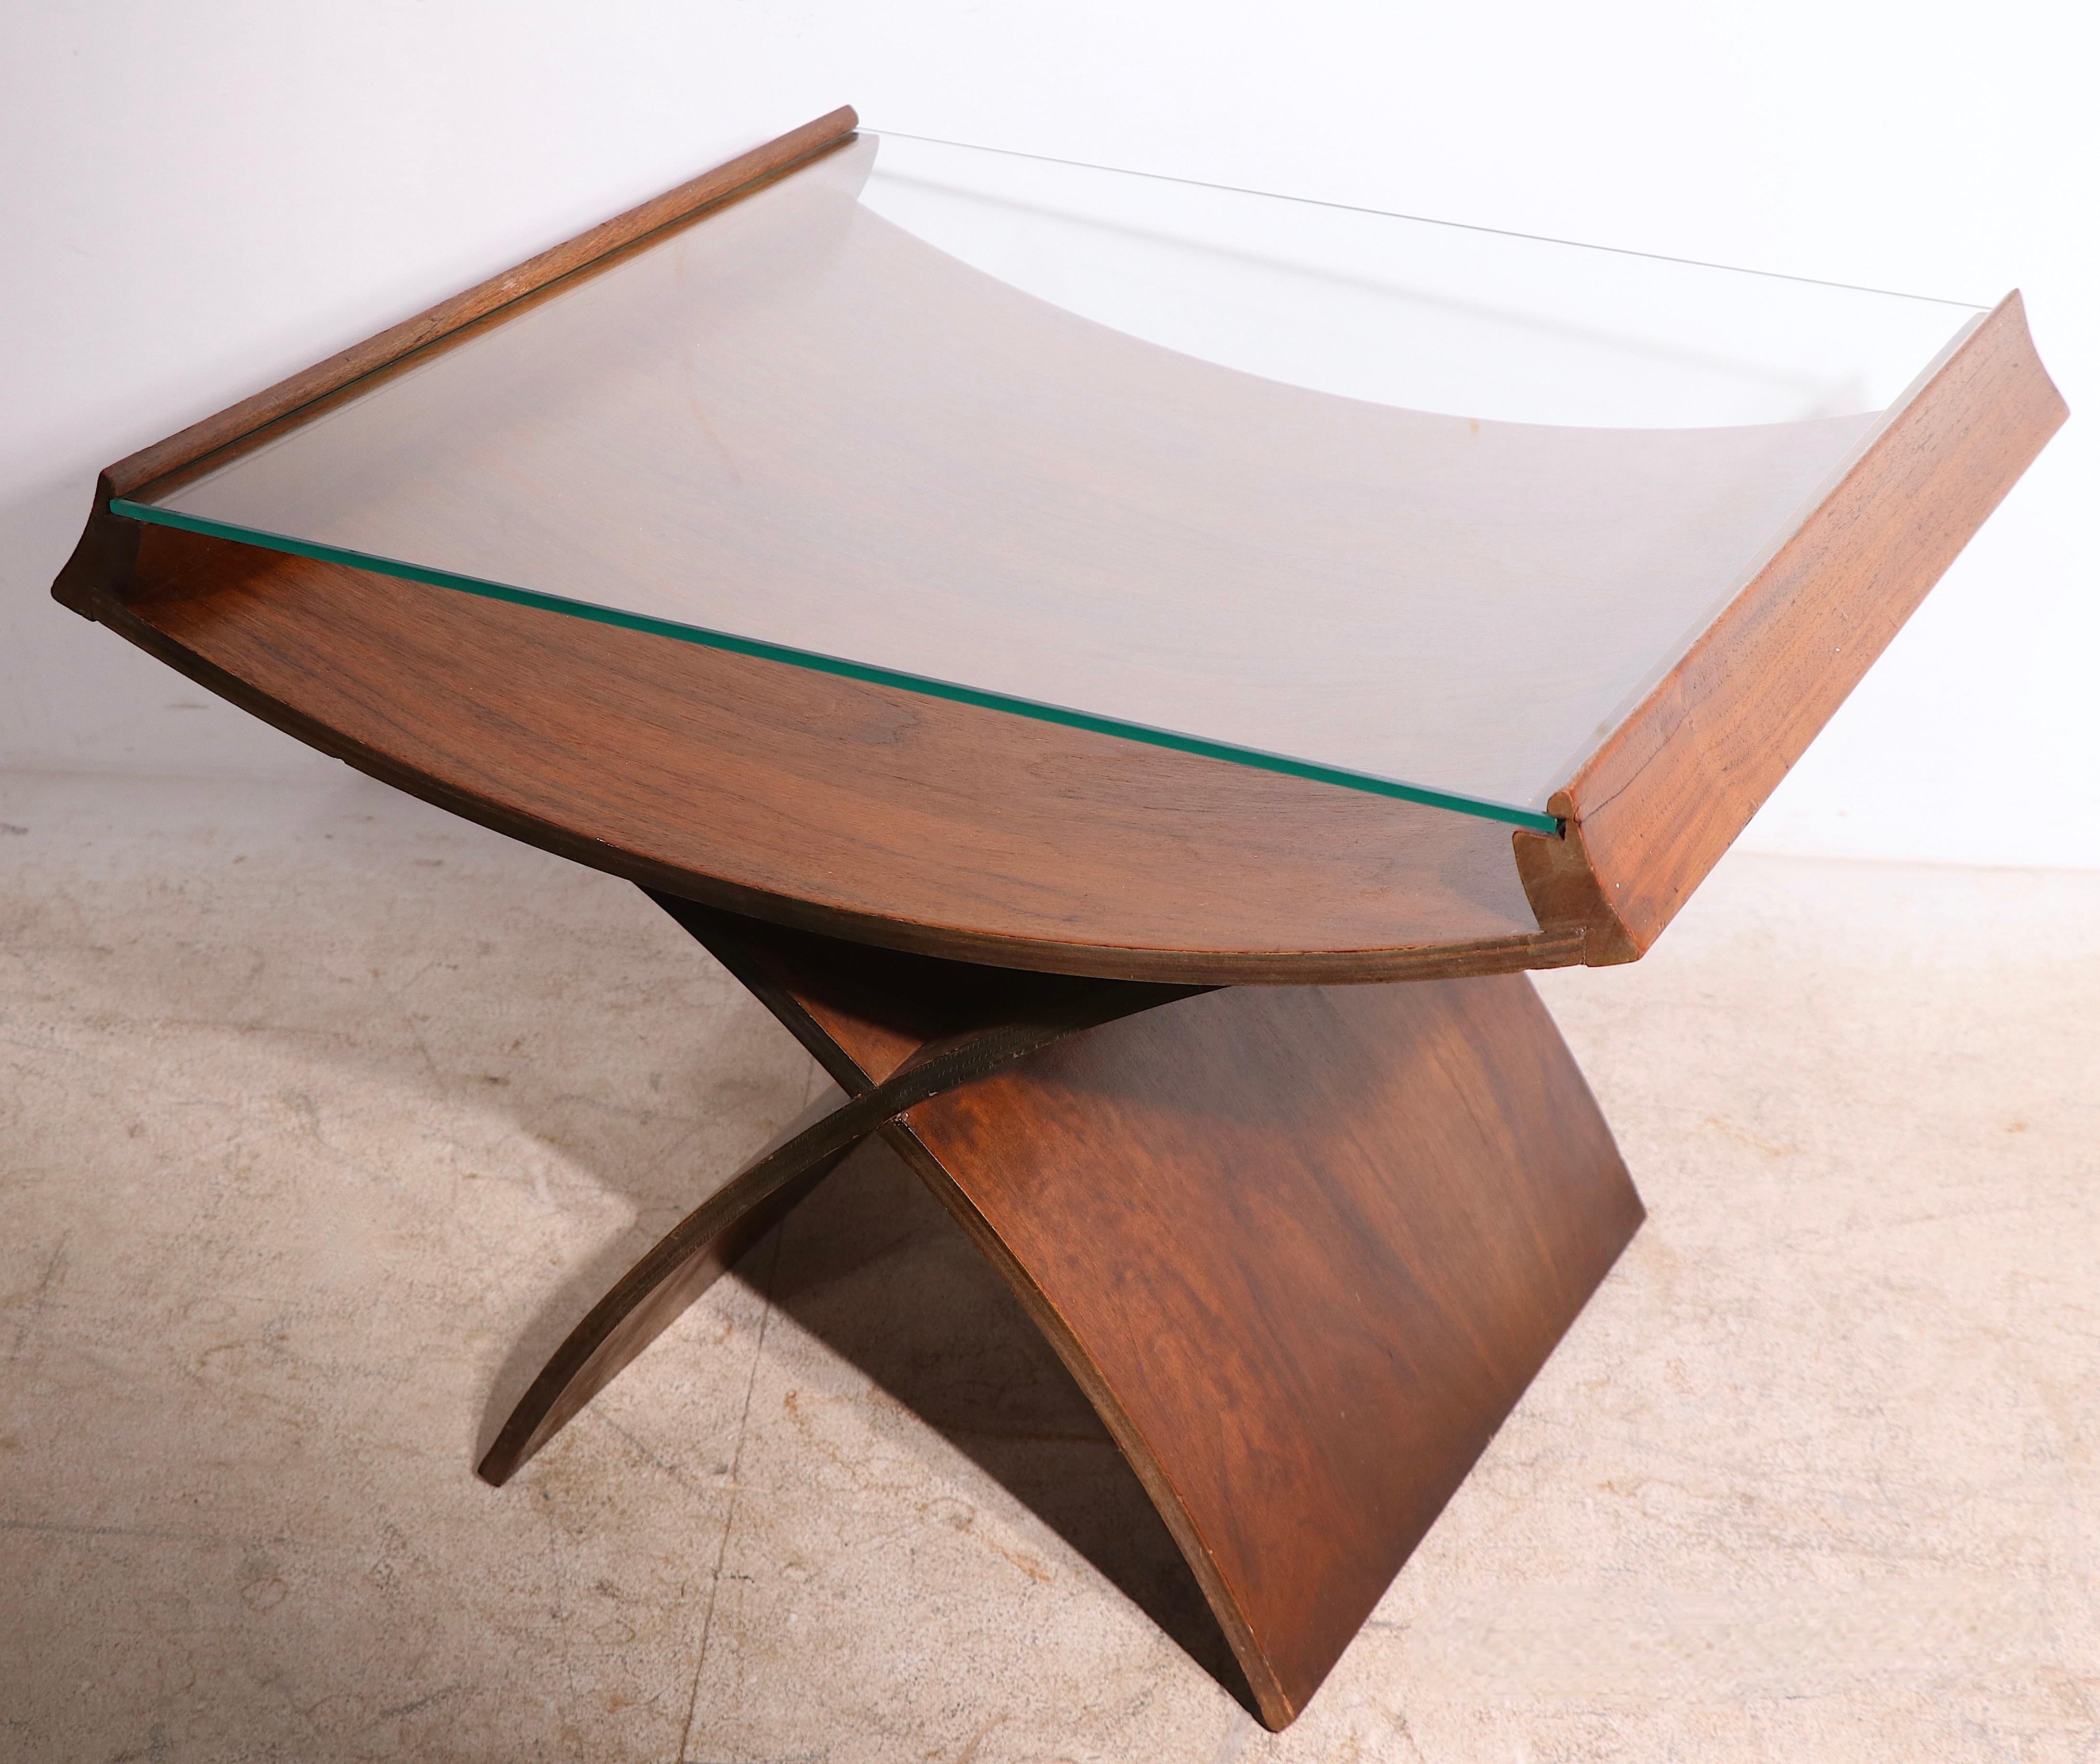 bent wood table